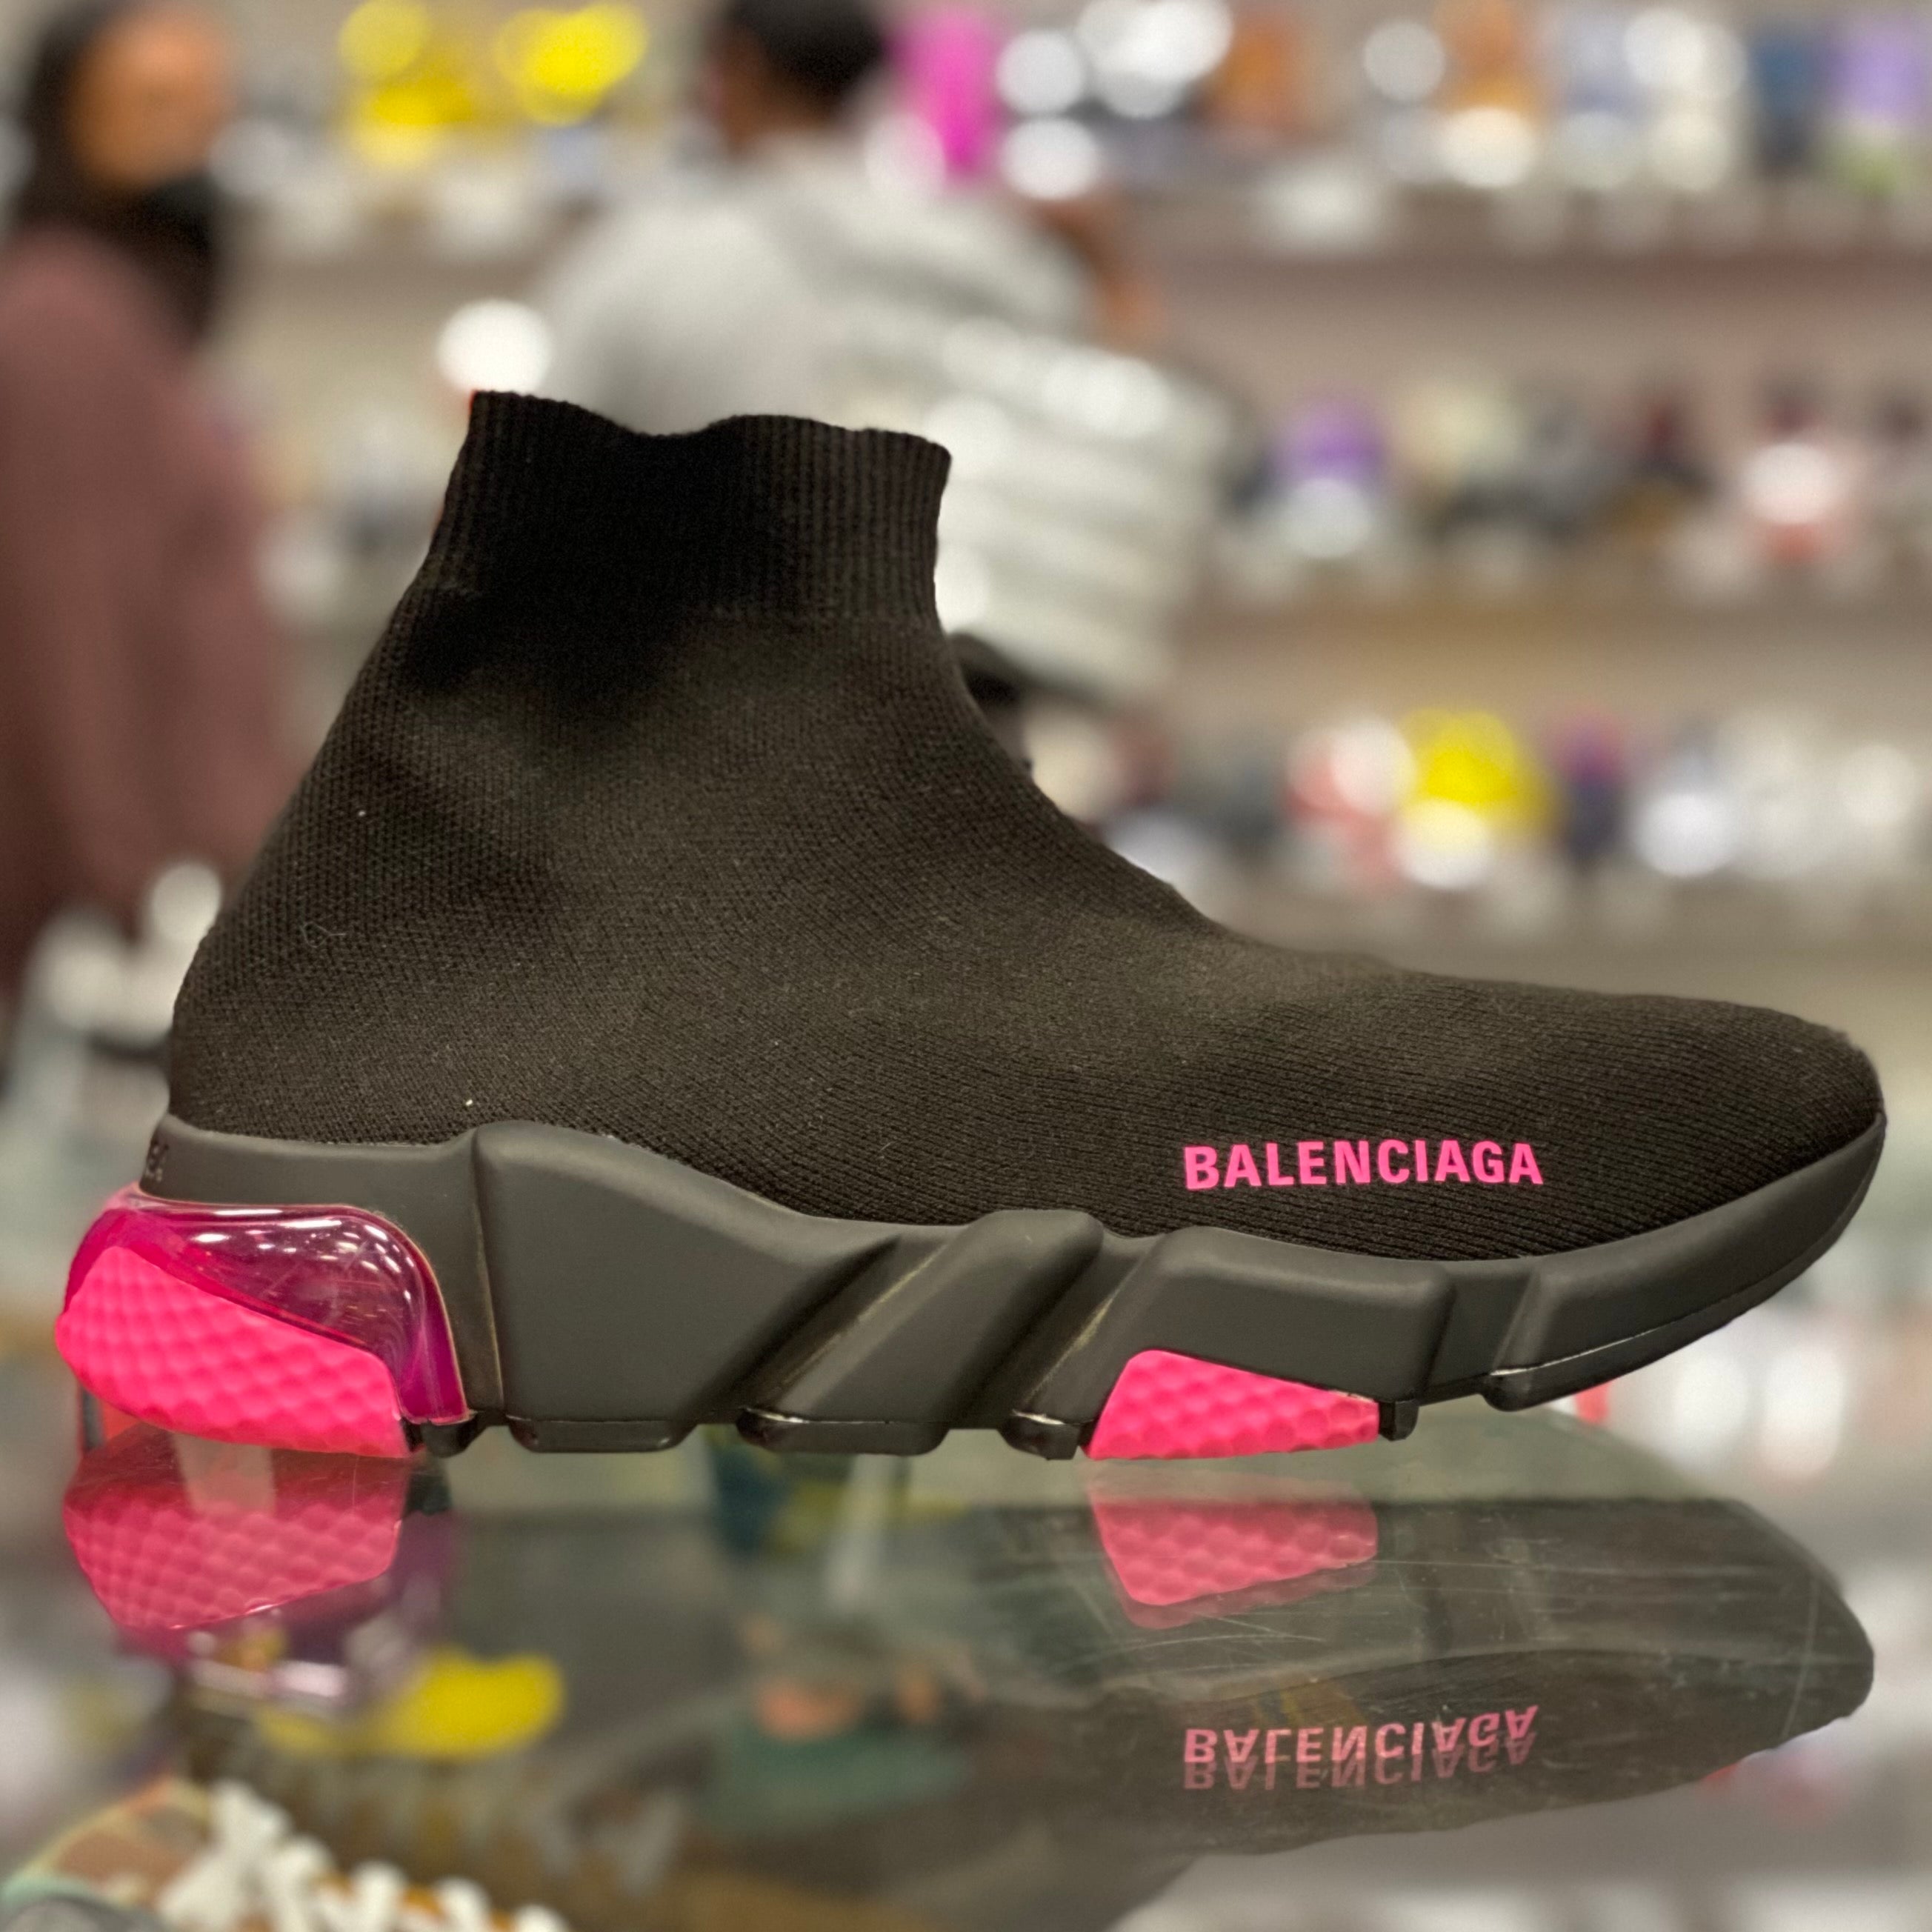 Balenciaga Black & Red Clear Sole Speed Sneakers